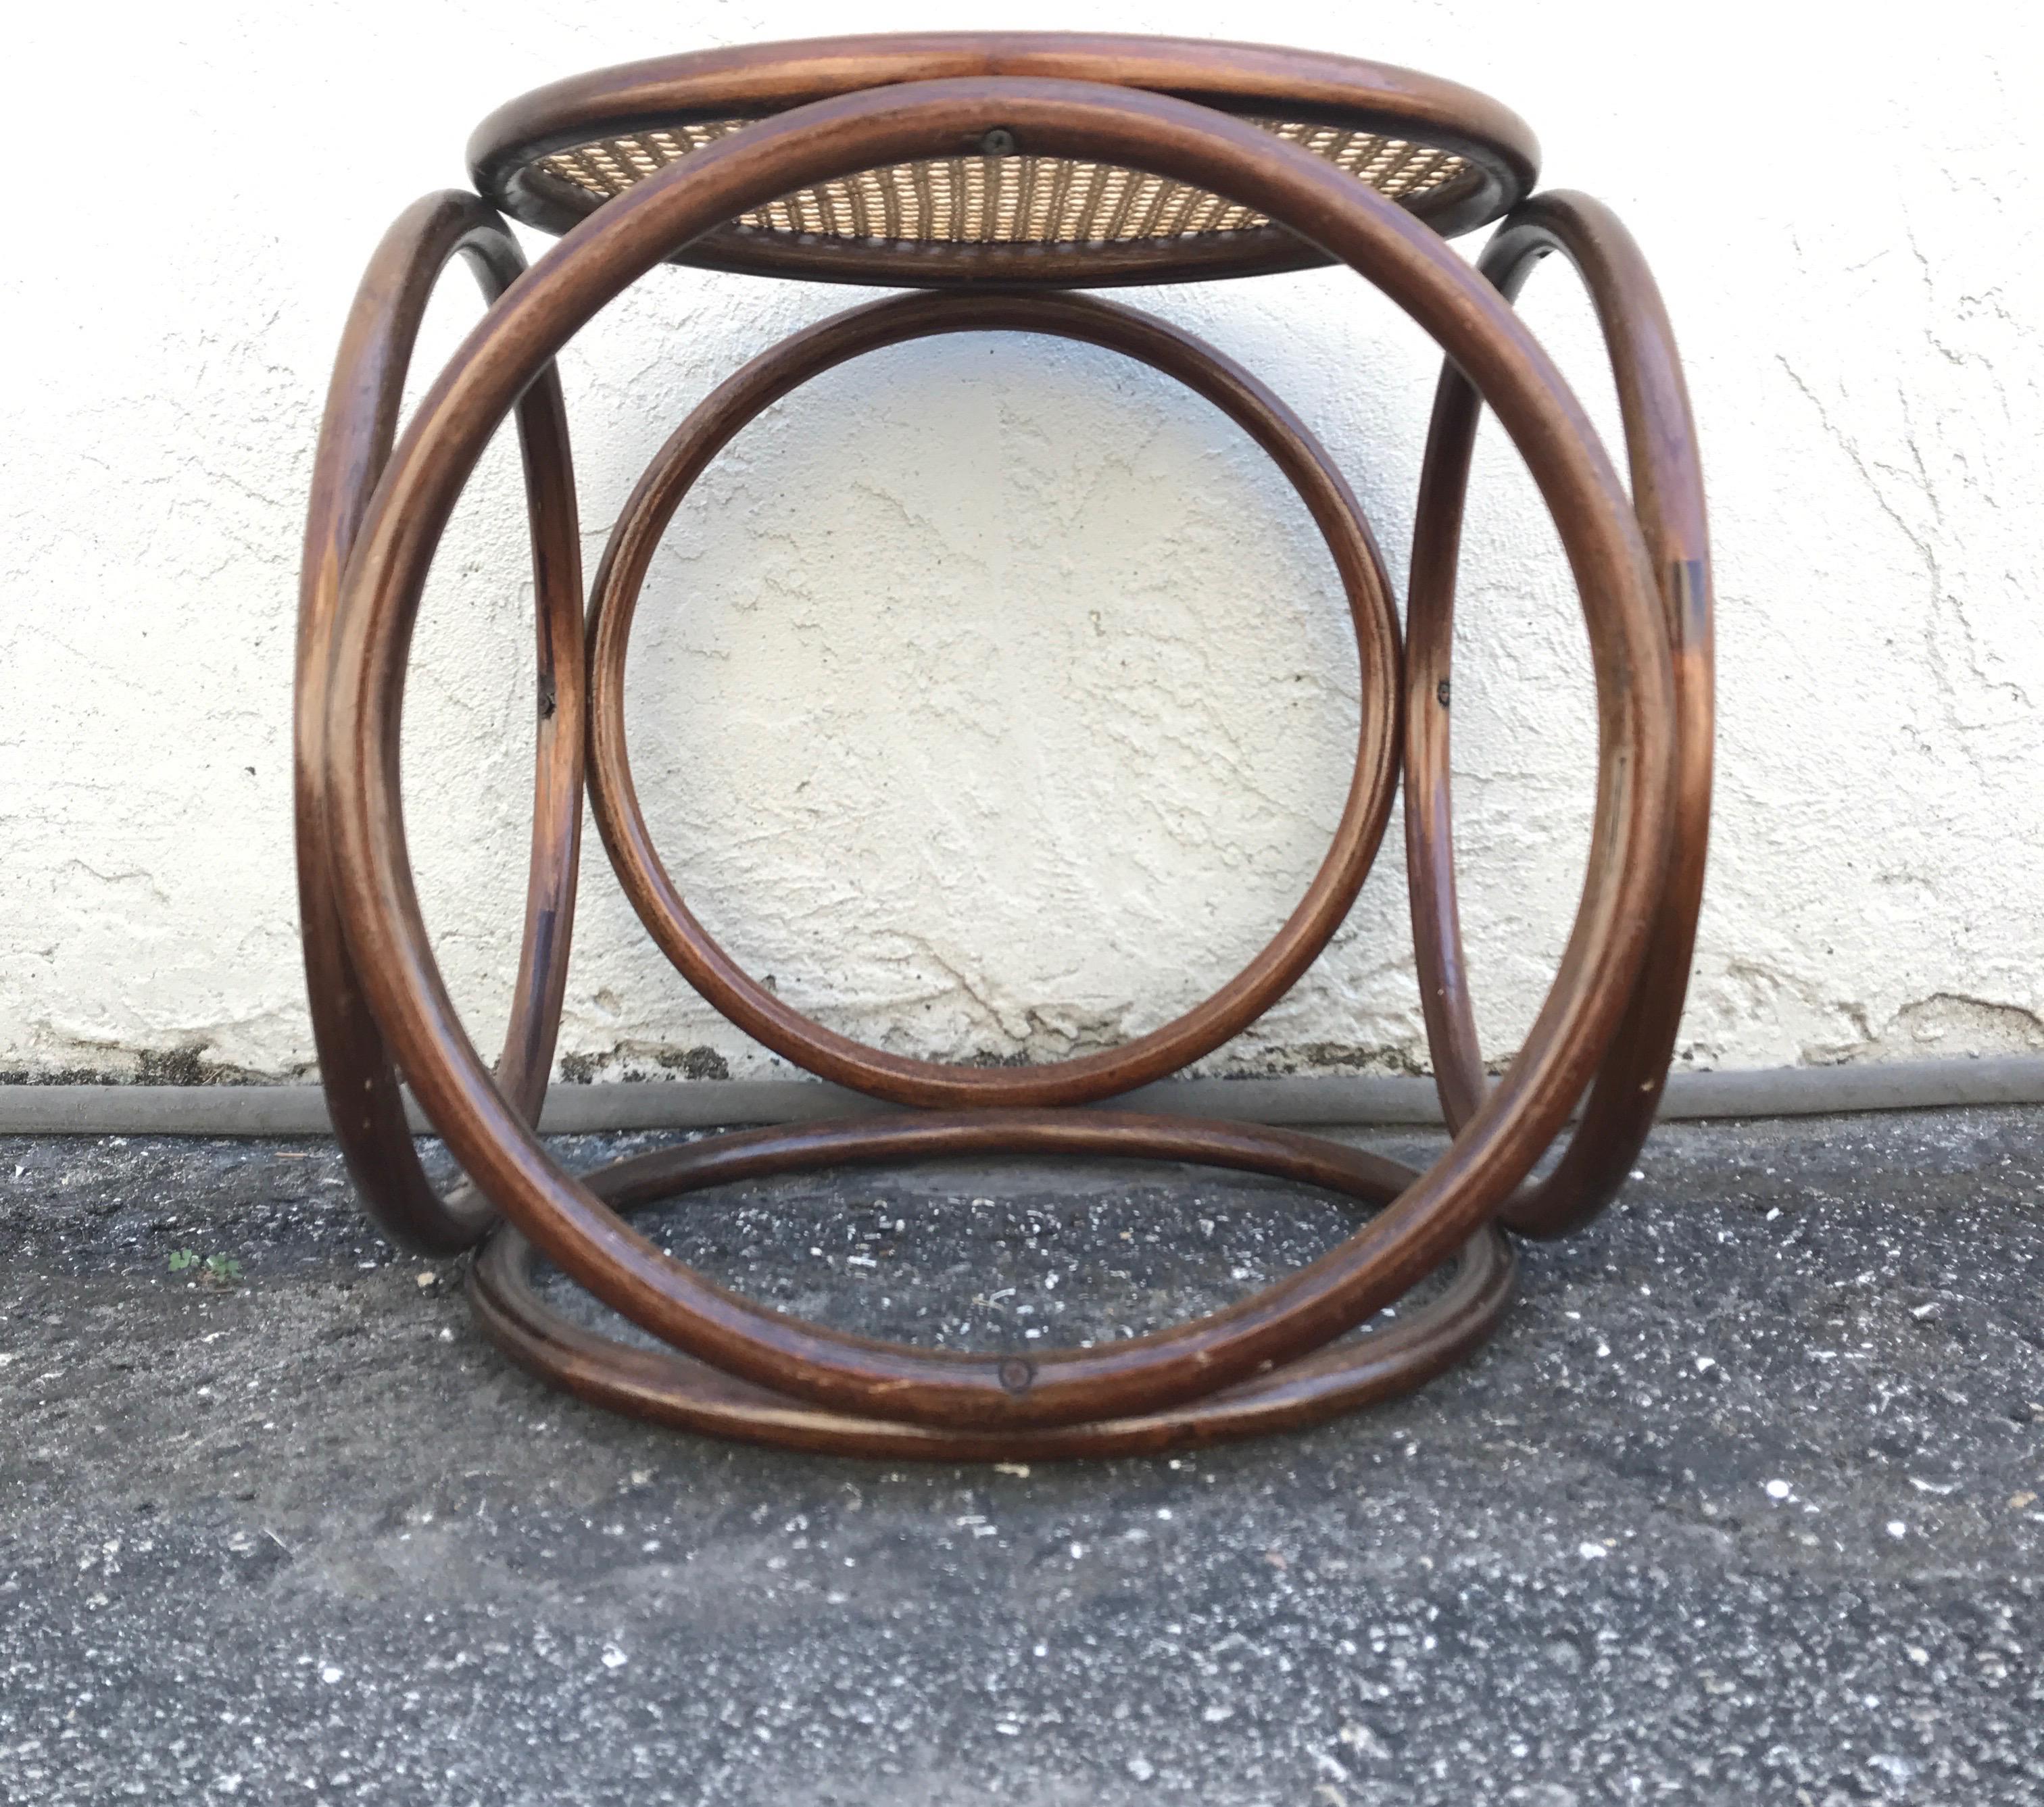 Cane top bentwood stool in the shape of a cube designed by Michael Thonet.